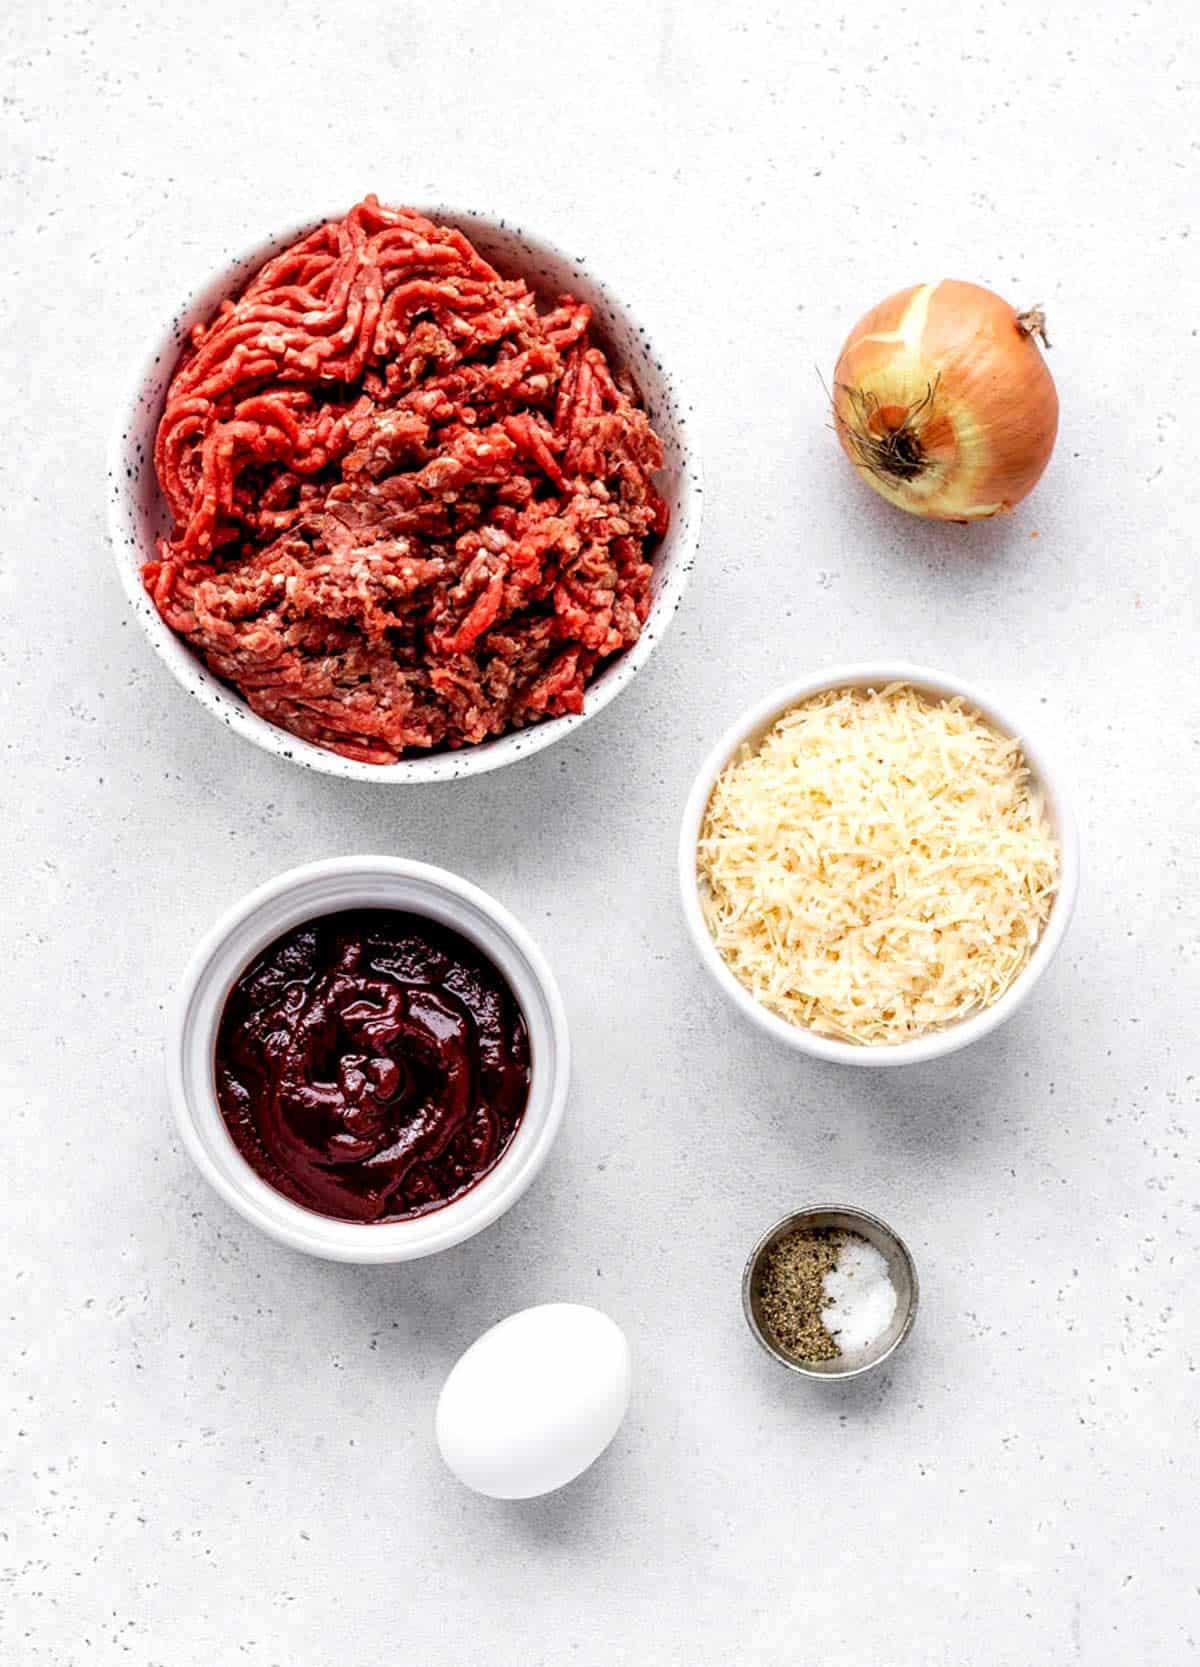 Ingredients for 5 ingredient meatloaf including lean ground beef, egg, salt, pepper, parmesan cheese, BBQ sauce and onion.